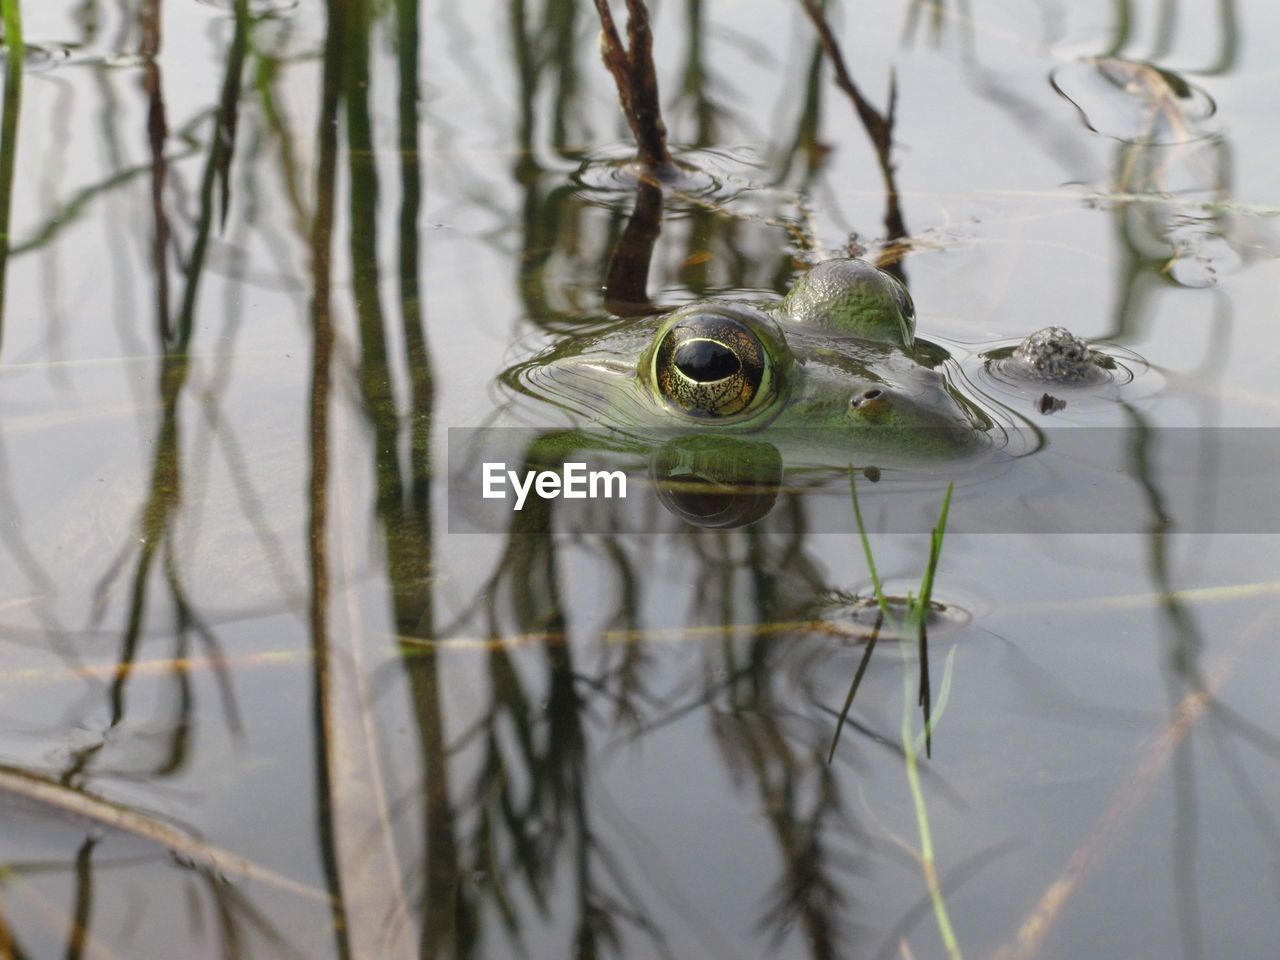 Close-up of frog eyes peeking out of reflective water